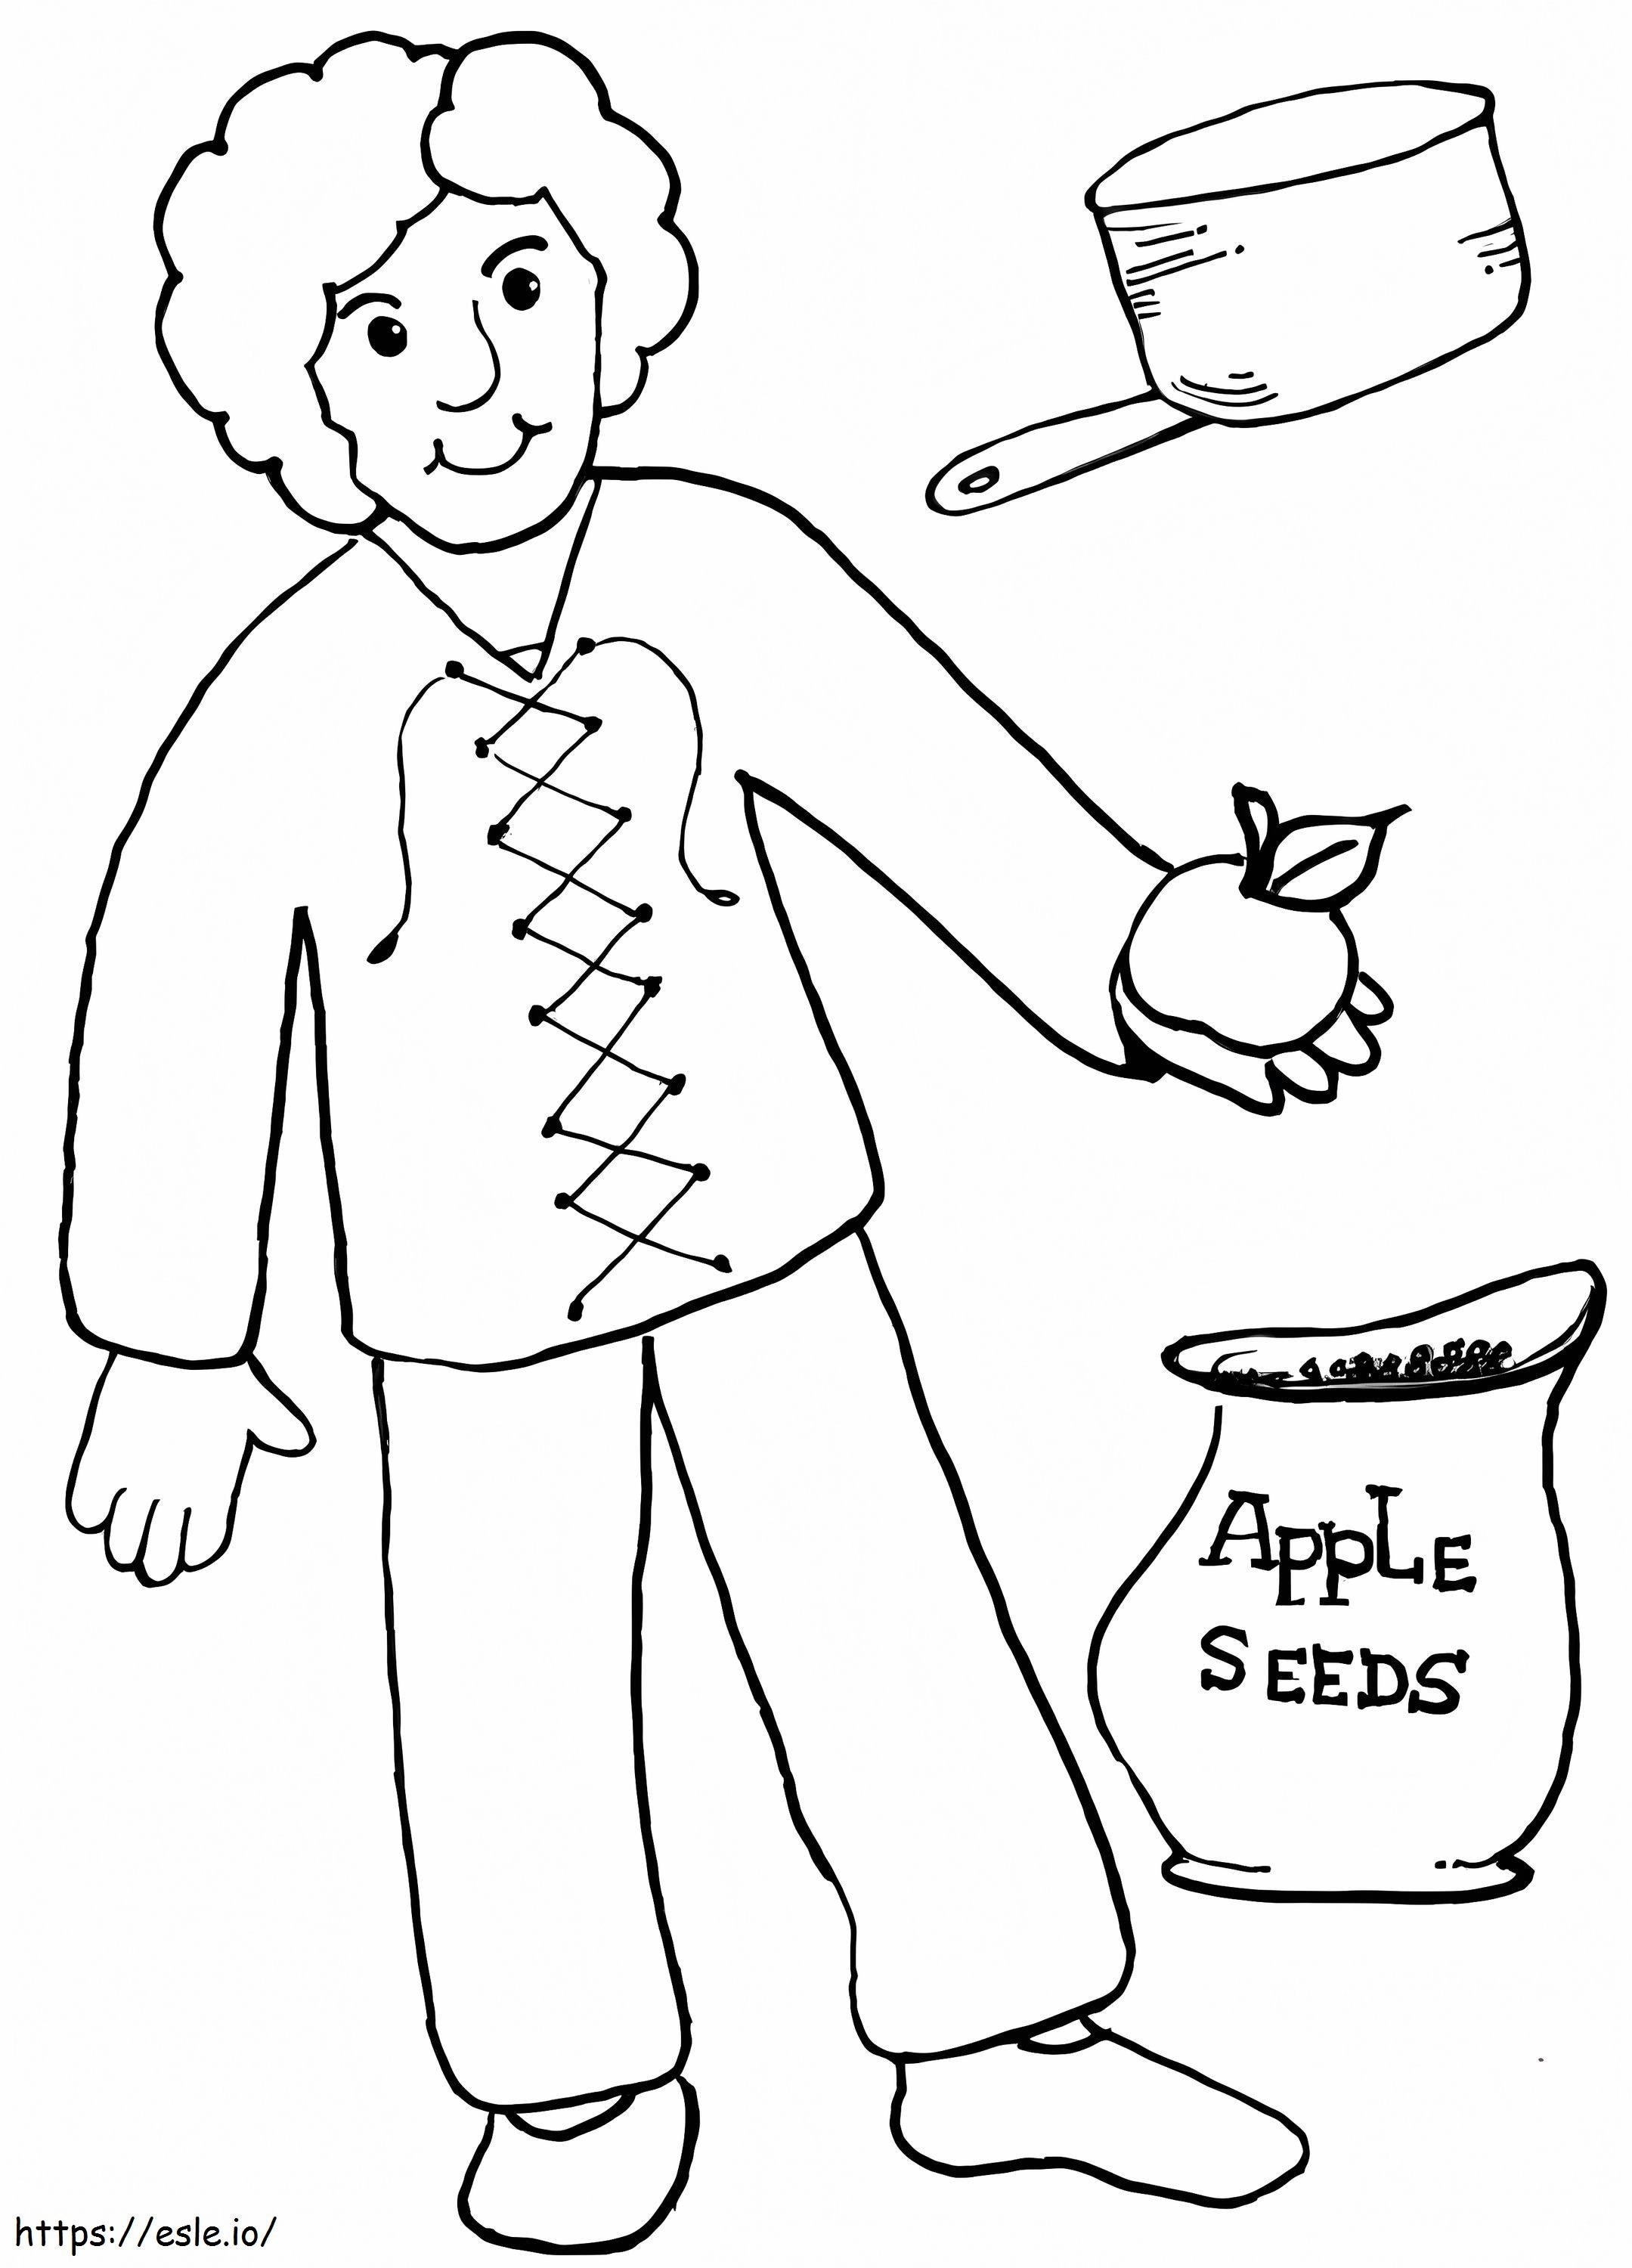 Johnny Appleseed 1 coloring page